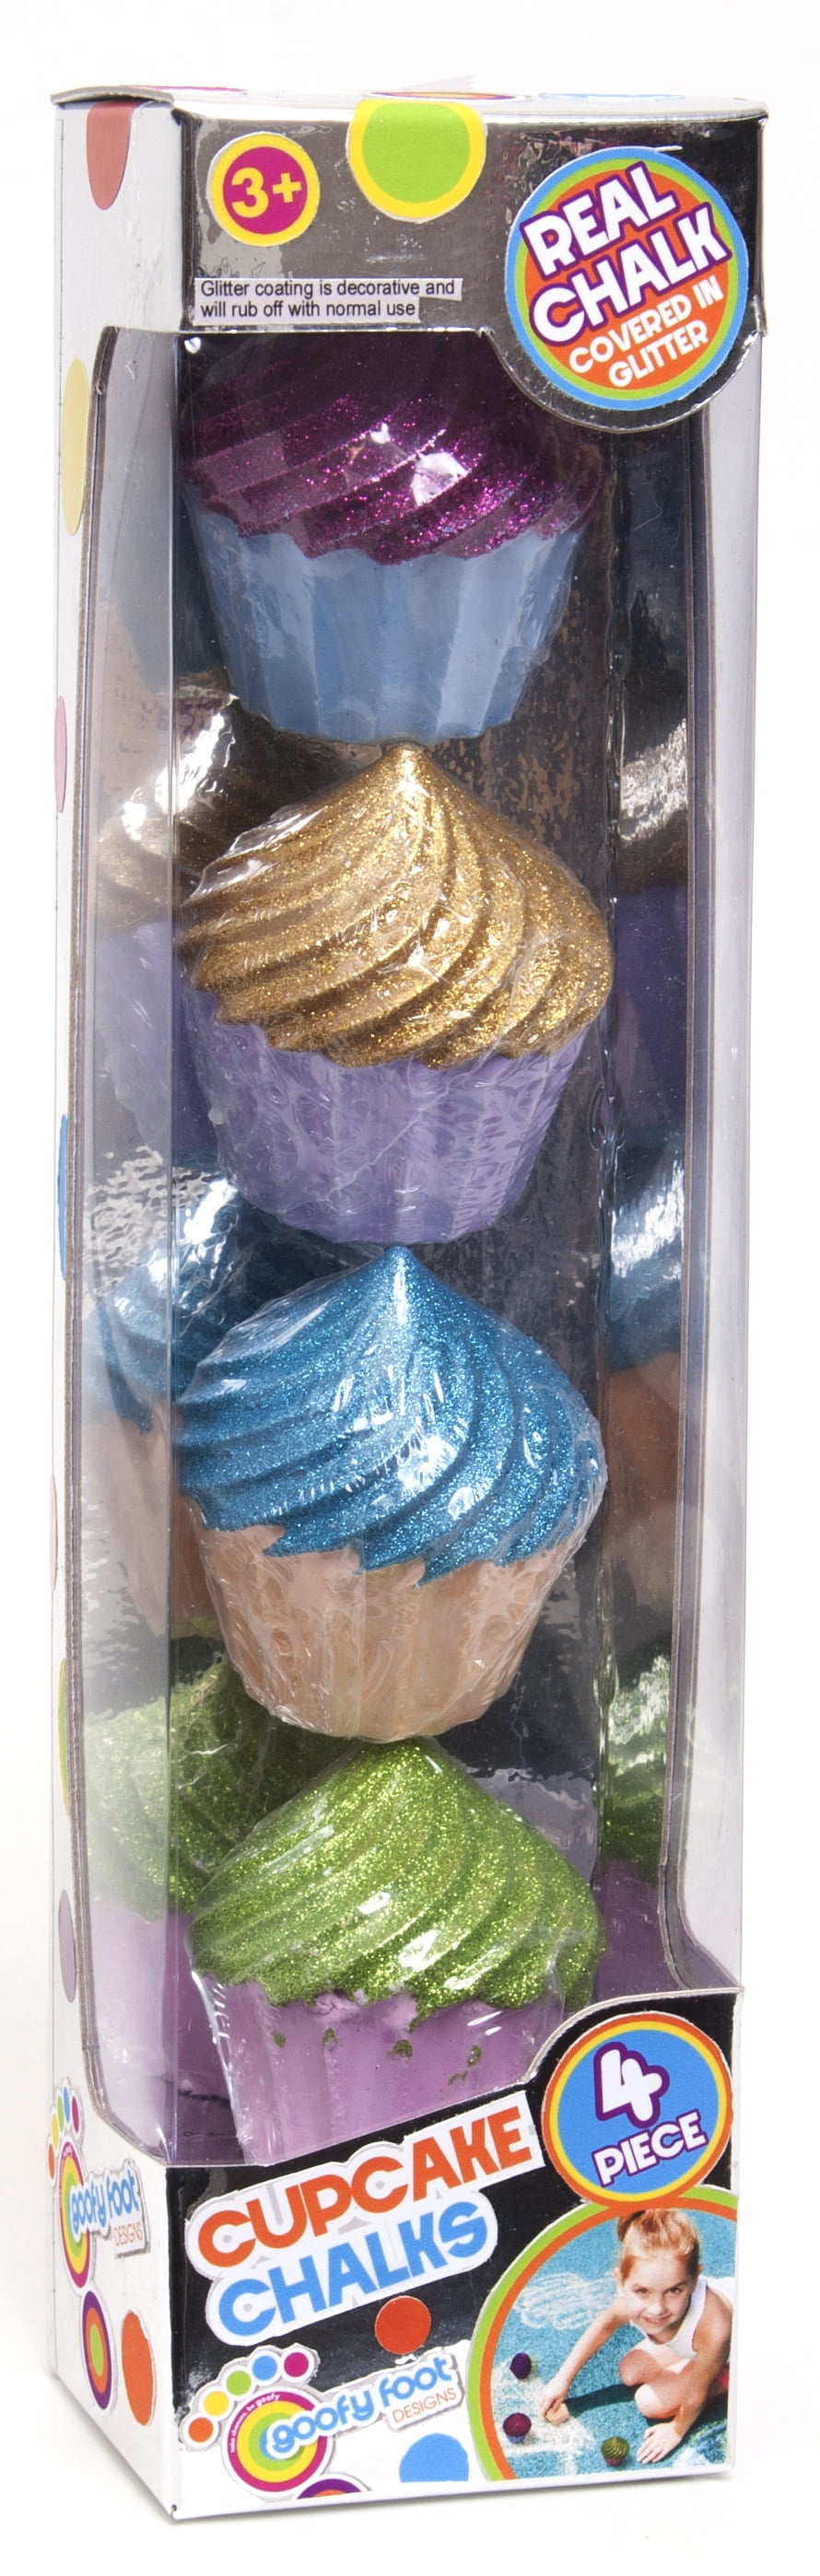 Goofy Foot Designs Cupcake Chalk  Glitter Coated!  (Pack of 4 Pieces)